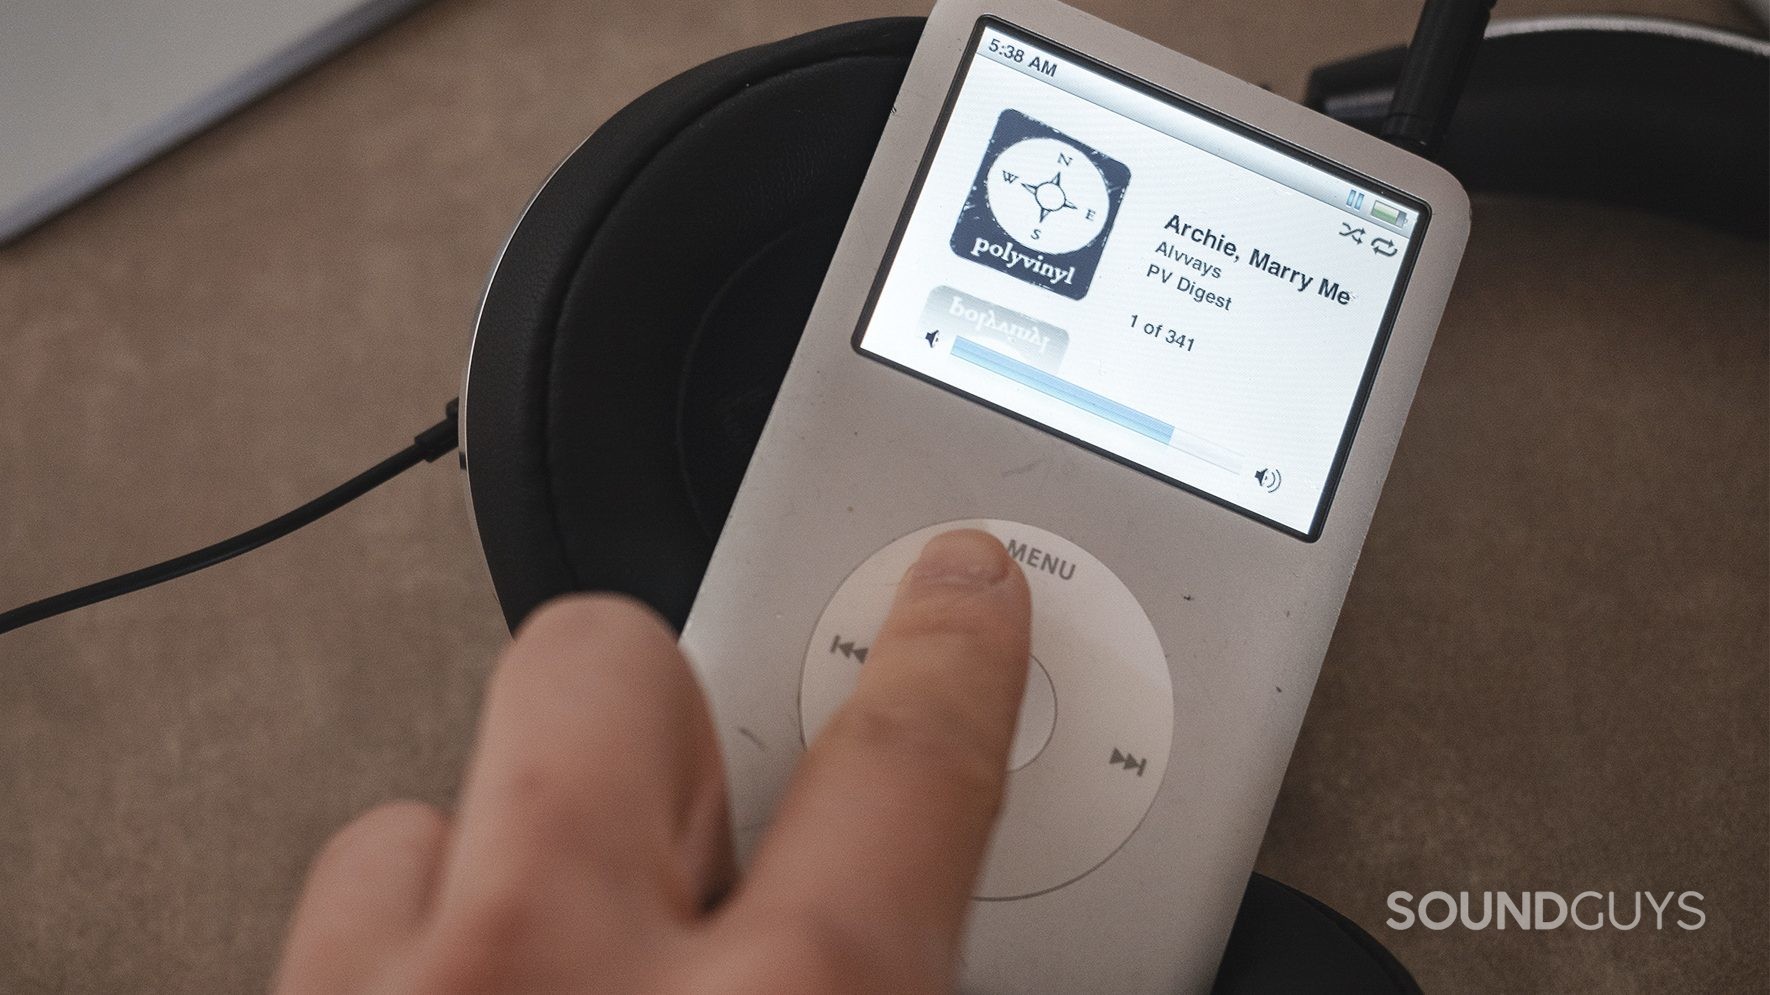 noise-induced hearing loss: A finger turning up the volume on an iPod Classic (silver).